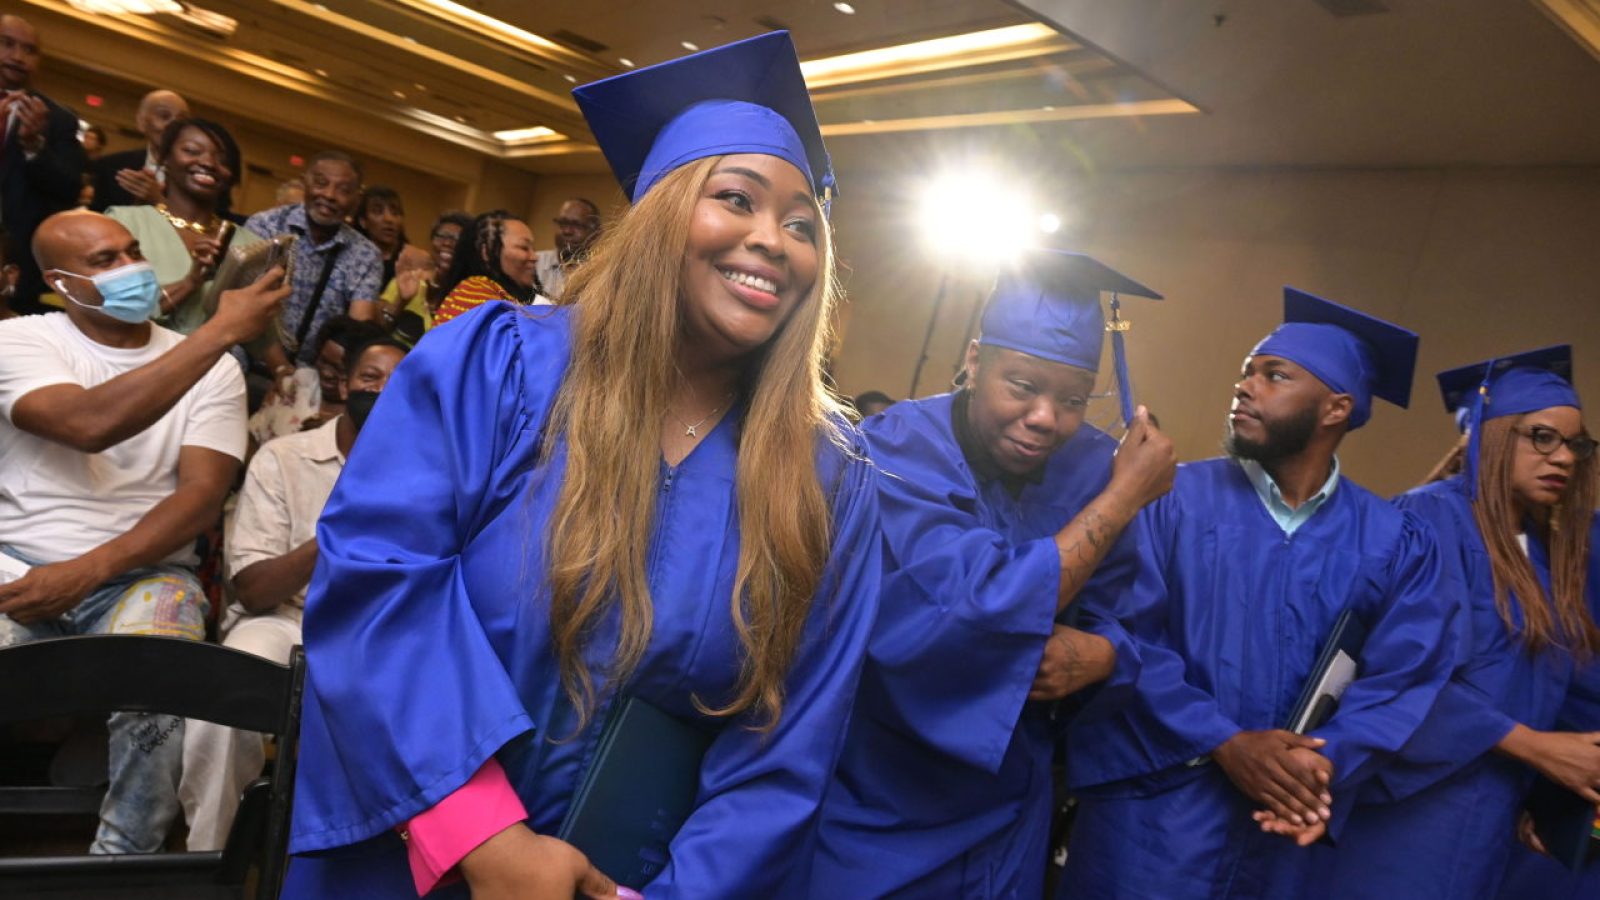 A female graduate of the Pivot Program wearing a blue cap and gown smiles as she graduates.